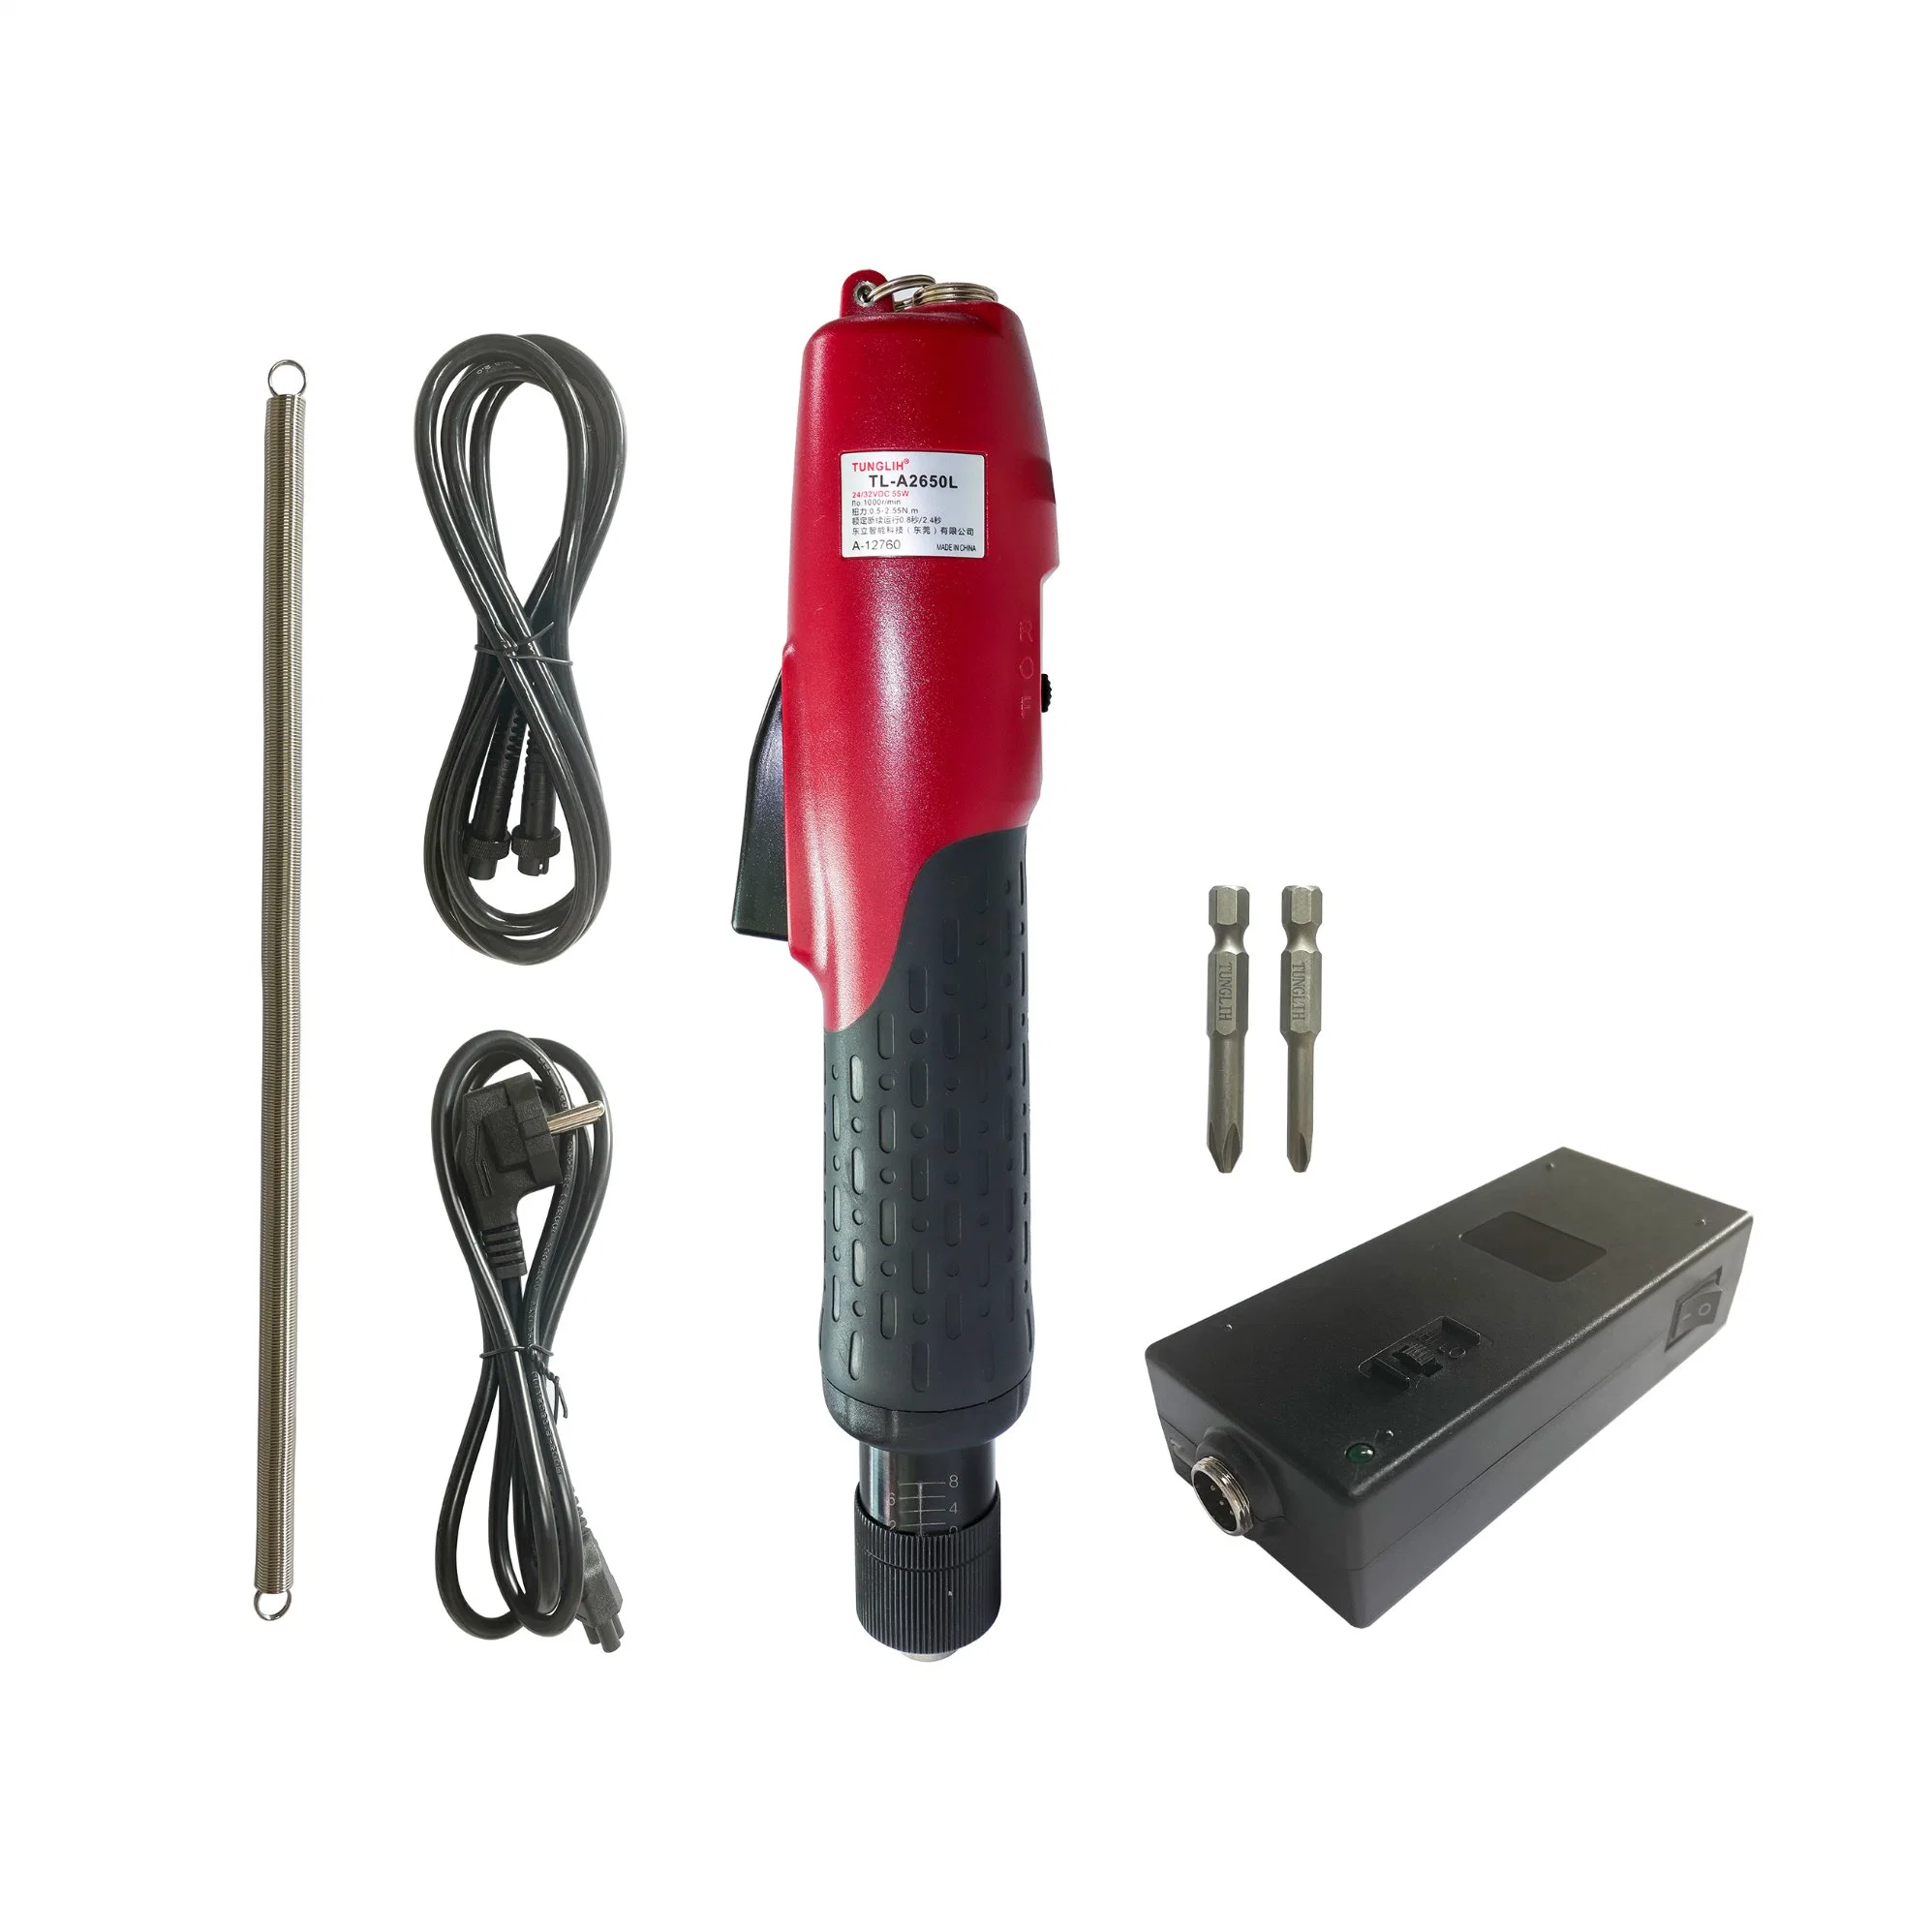 Tunglih Brushless Electric Screwdriver Lever Type for Assembly Lines